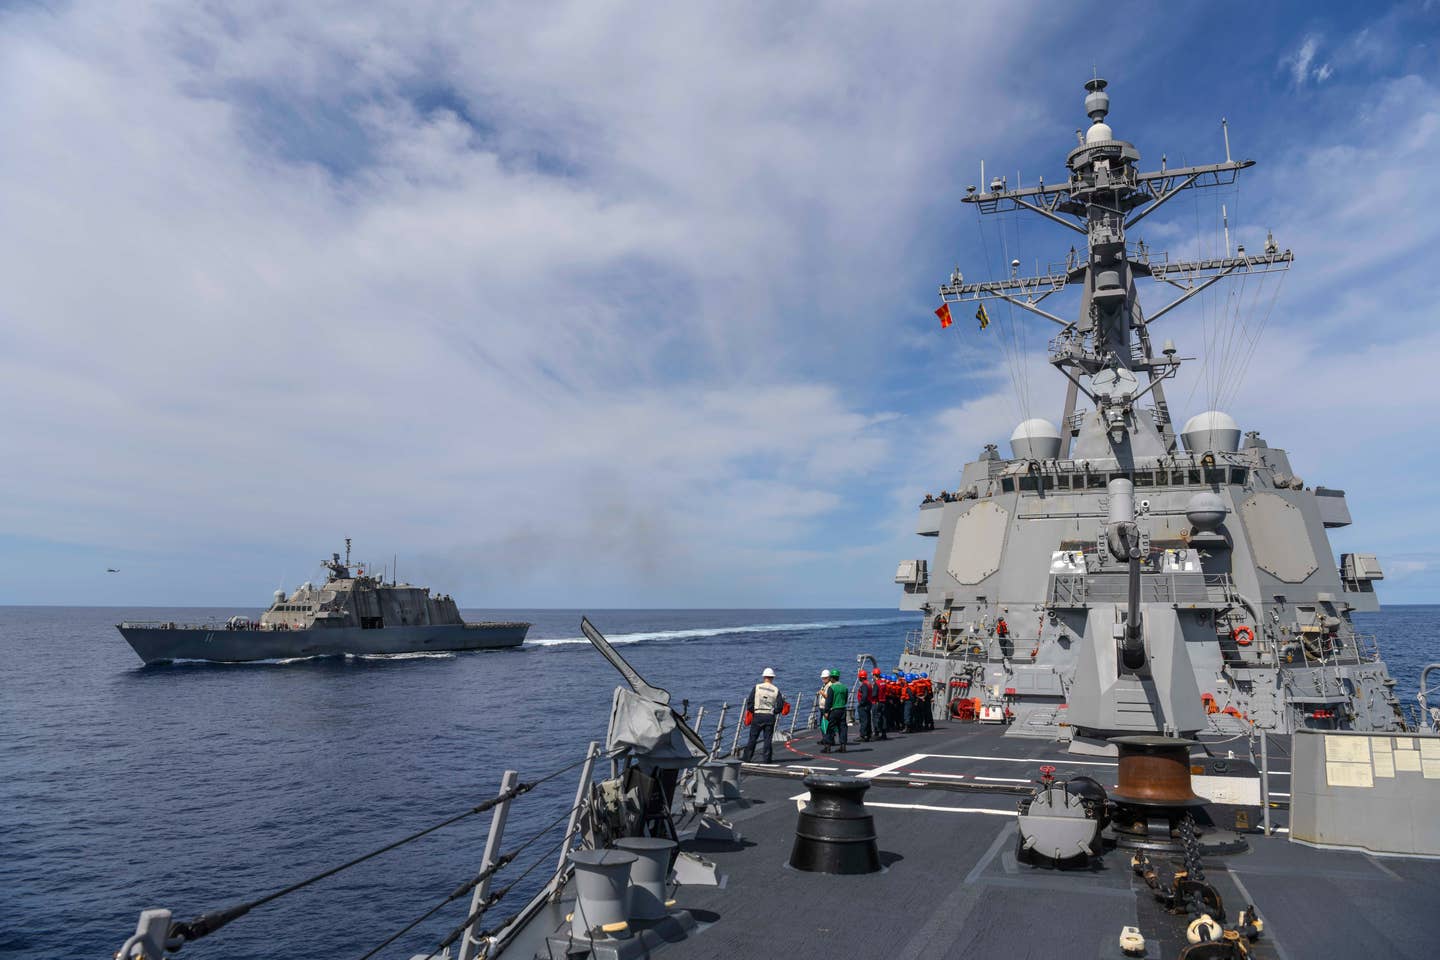 A picture of USS <em>Sioux City</em>, seen at left, sailing in the Atlantic, taken from the deck of the <em>Arleigh Burke</em> class destroyer USS <em>Paul Ignatius</em> on May 3, 2022. <em>U.S. Navy photo by Mass Communication Specialist 2nd Class Trey Fowler</em>